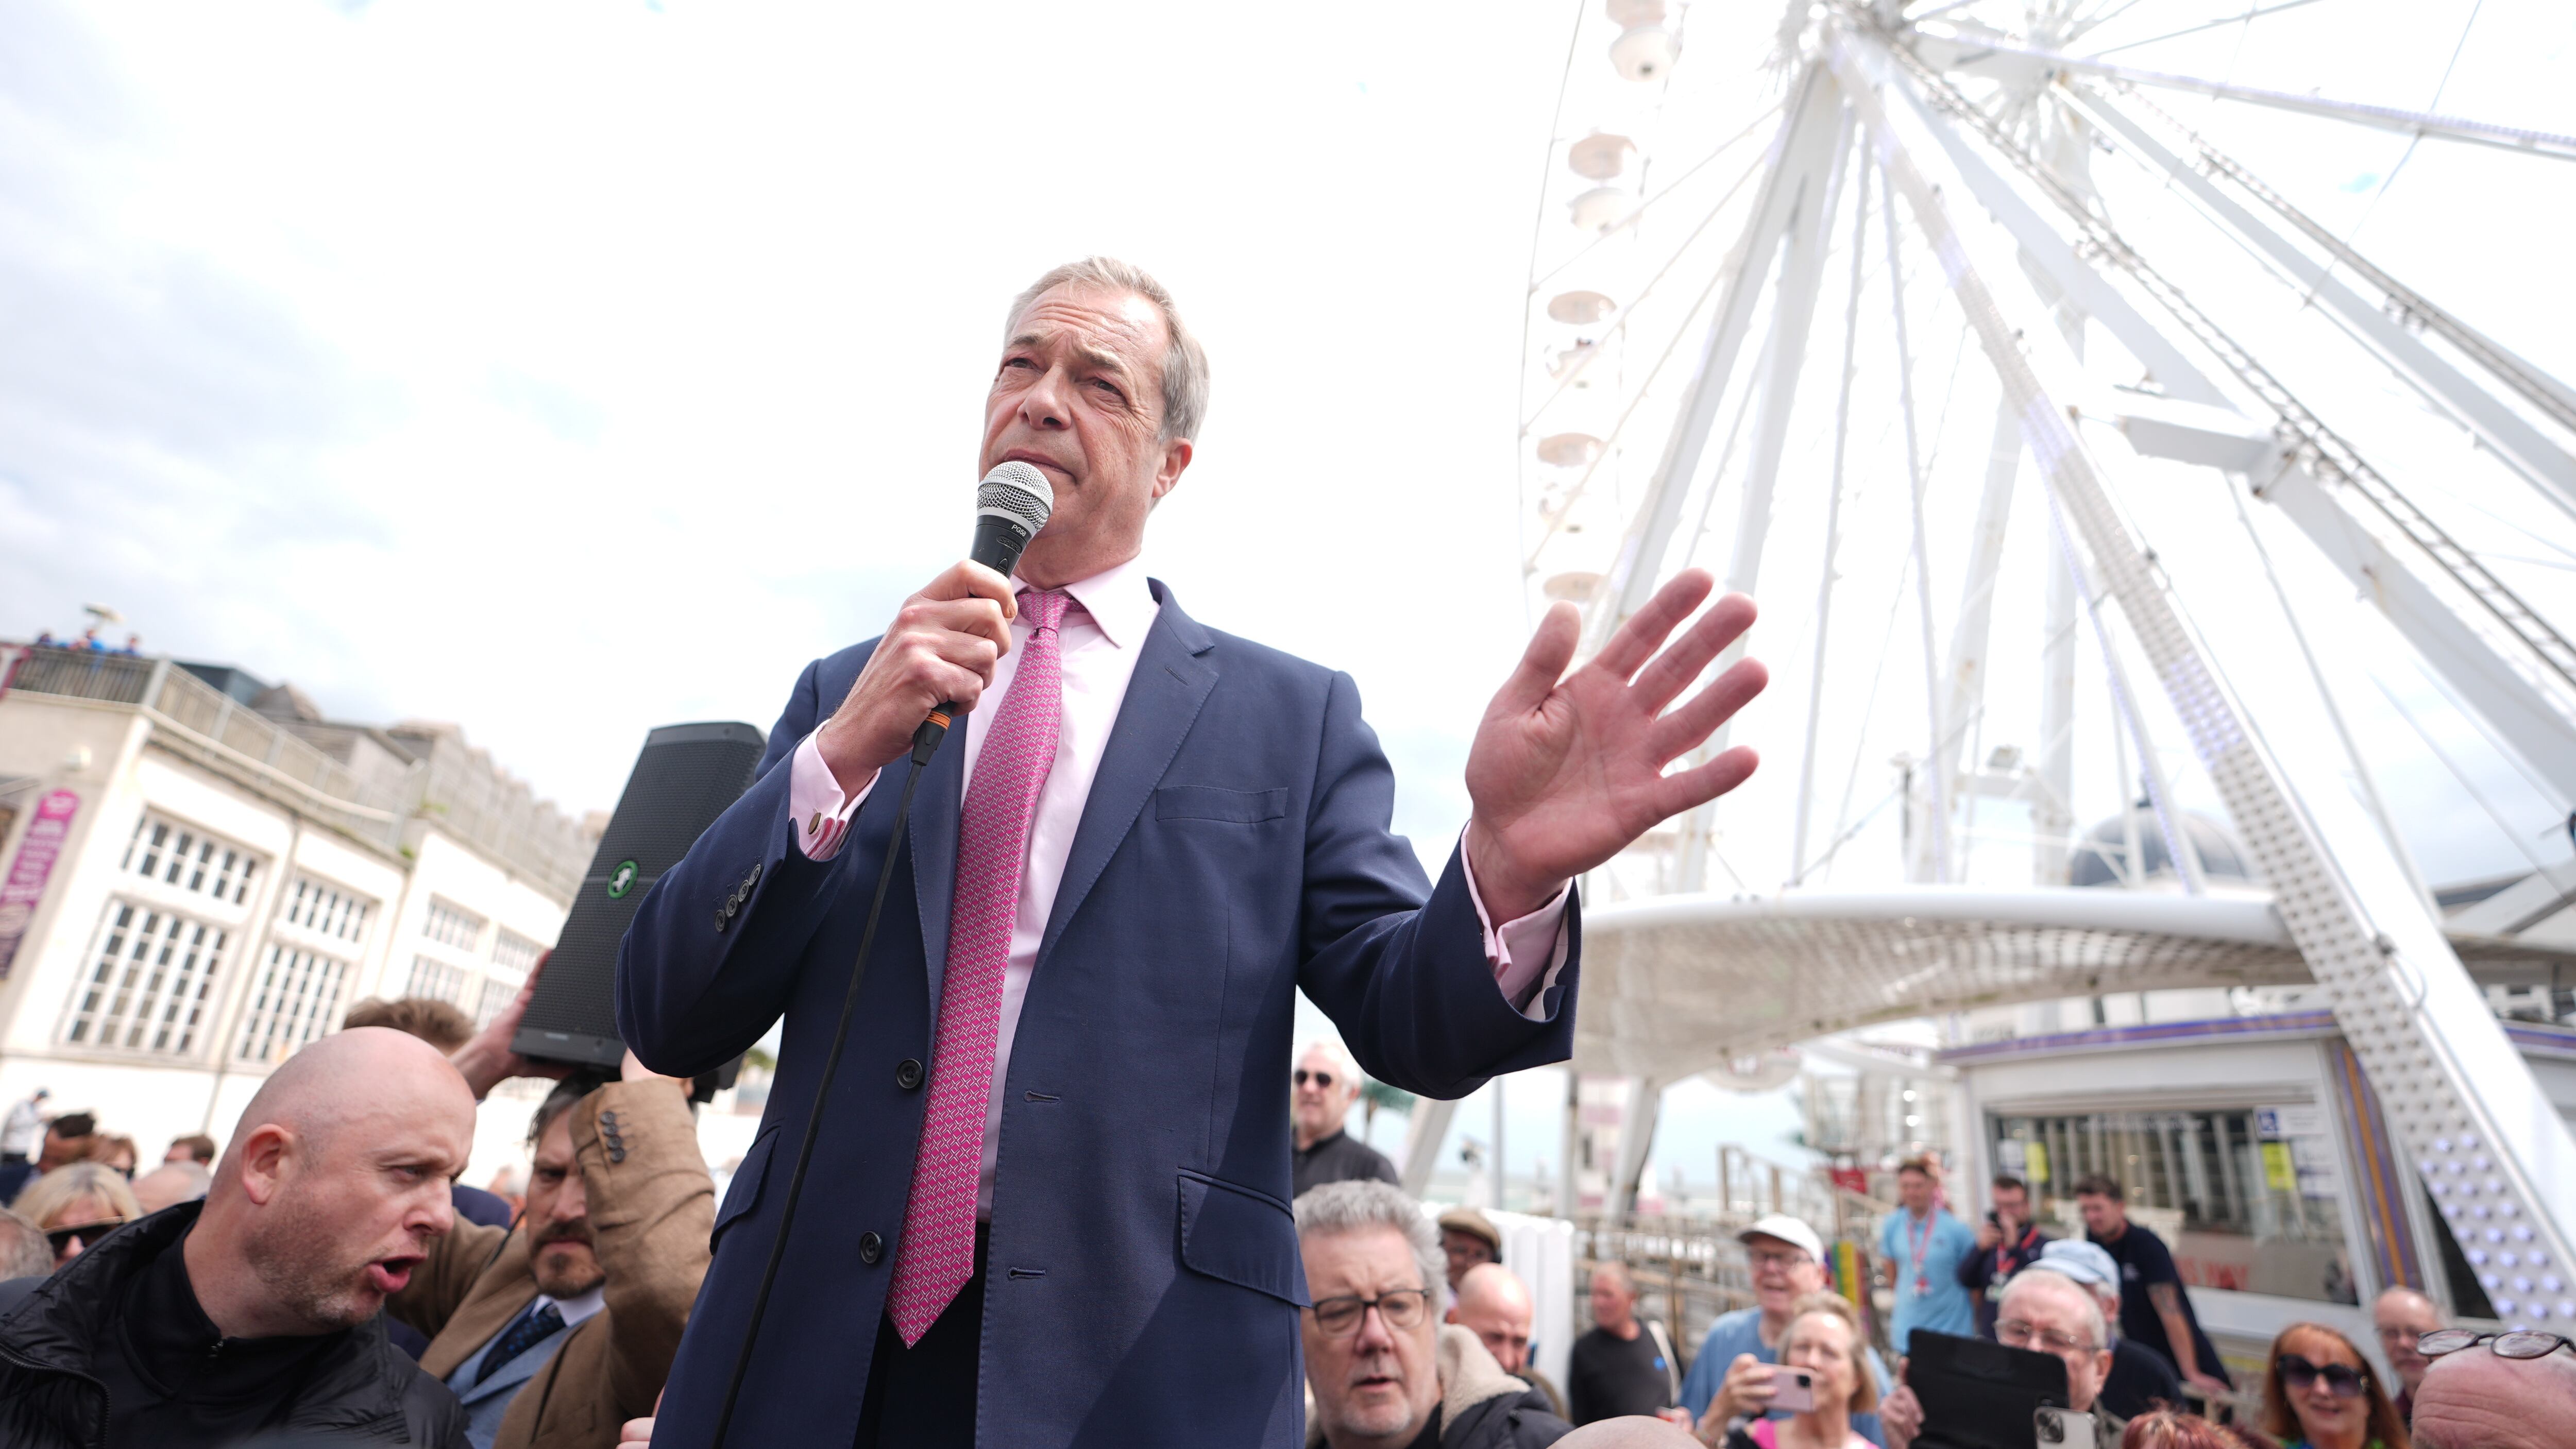 Reform UK leader Nigel Farage could deliver one of the shock election results in eastern England in the seat of Clacton, where he is a candidate